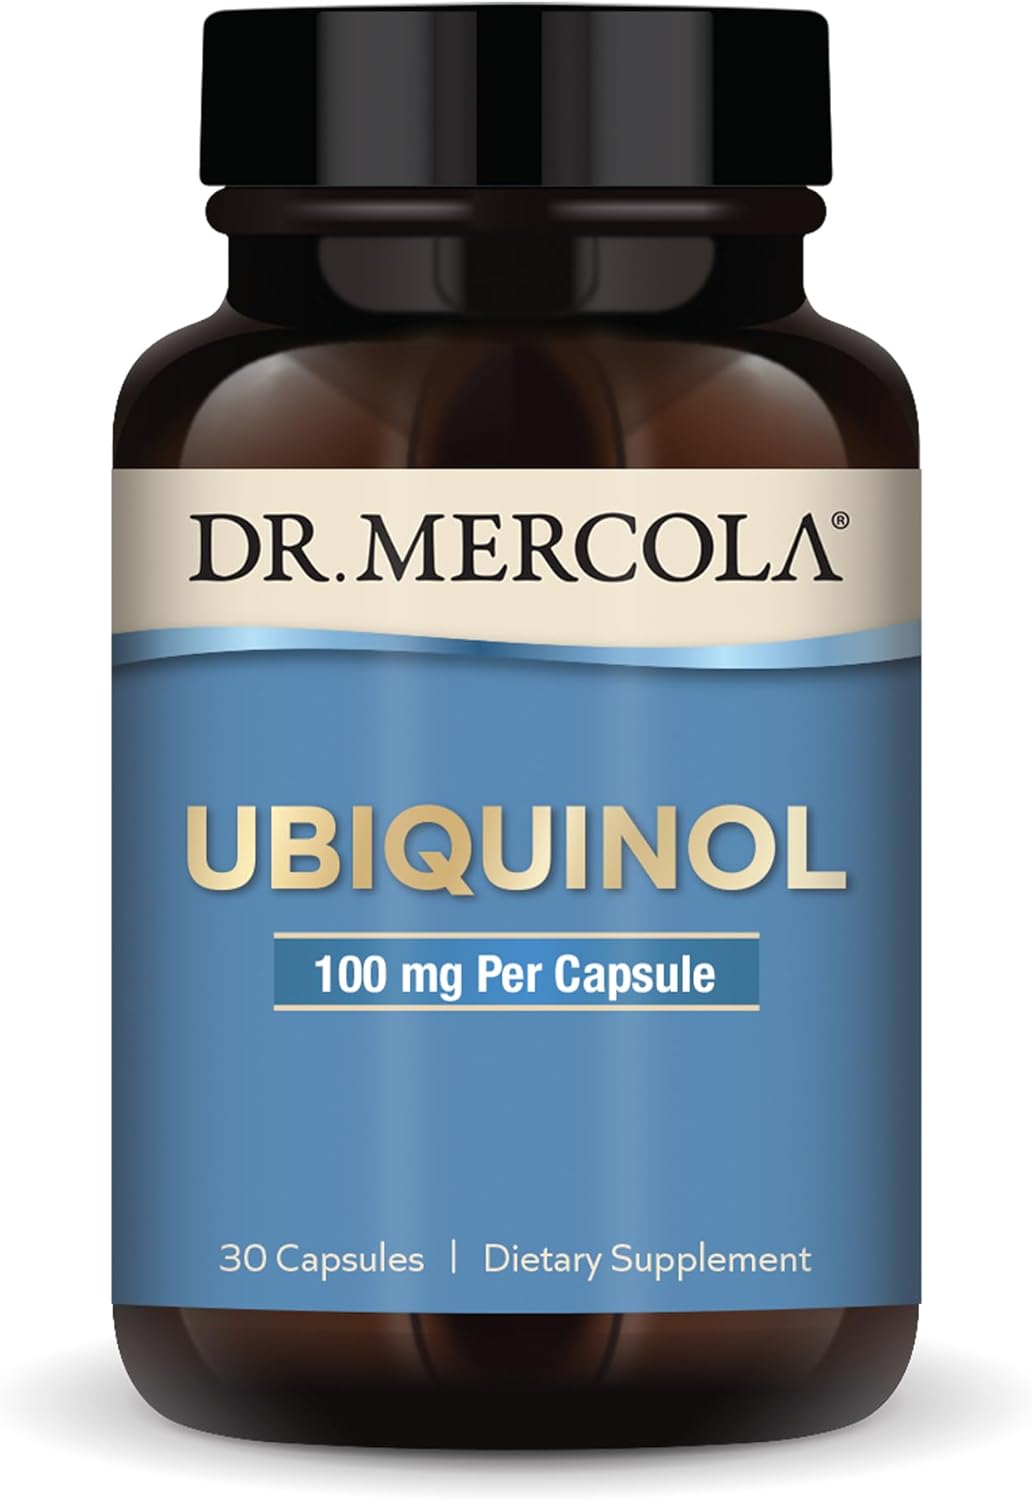 Dr. Mercola Ubiquinol 100 mg Per Serving, 30 Servings (30 Capsules), Dietary Supplement, Supports Overall Health and Wellness, Non GMO